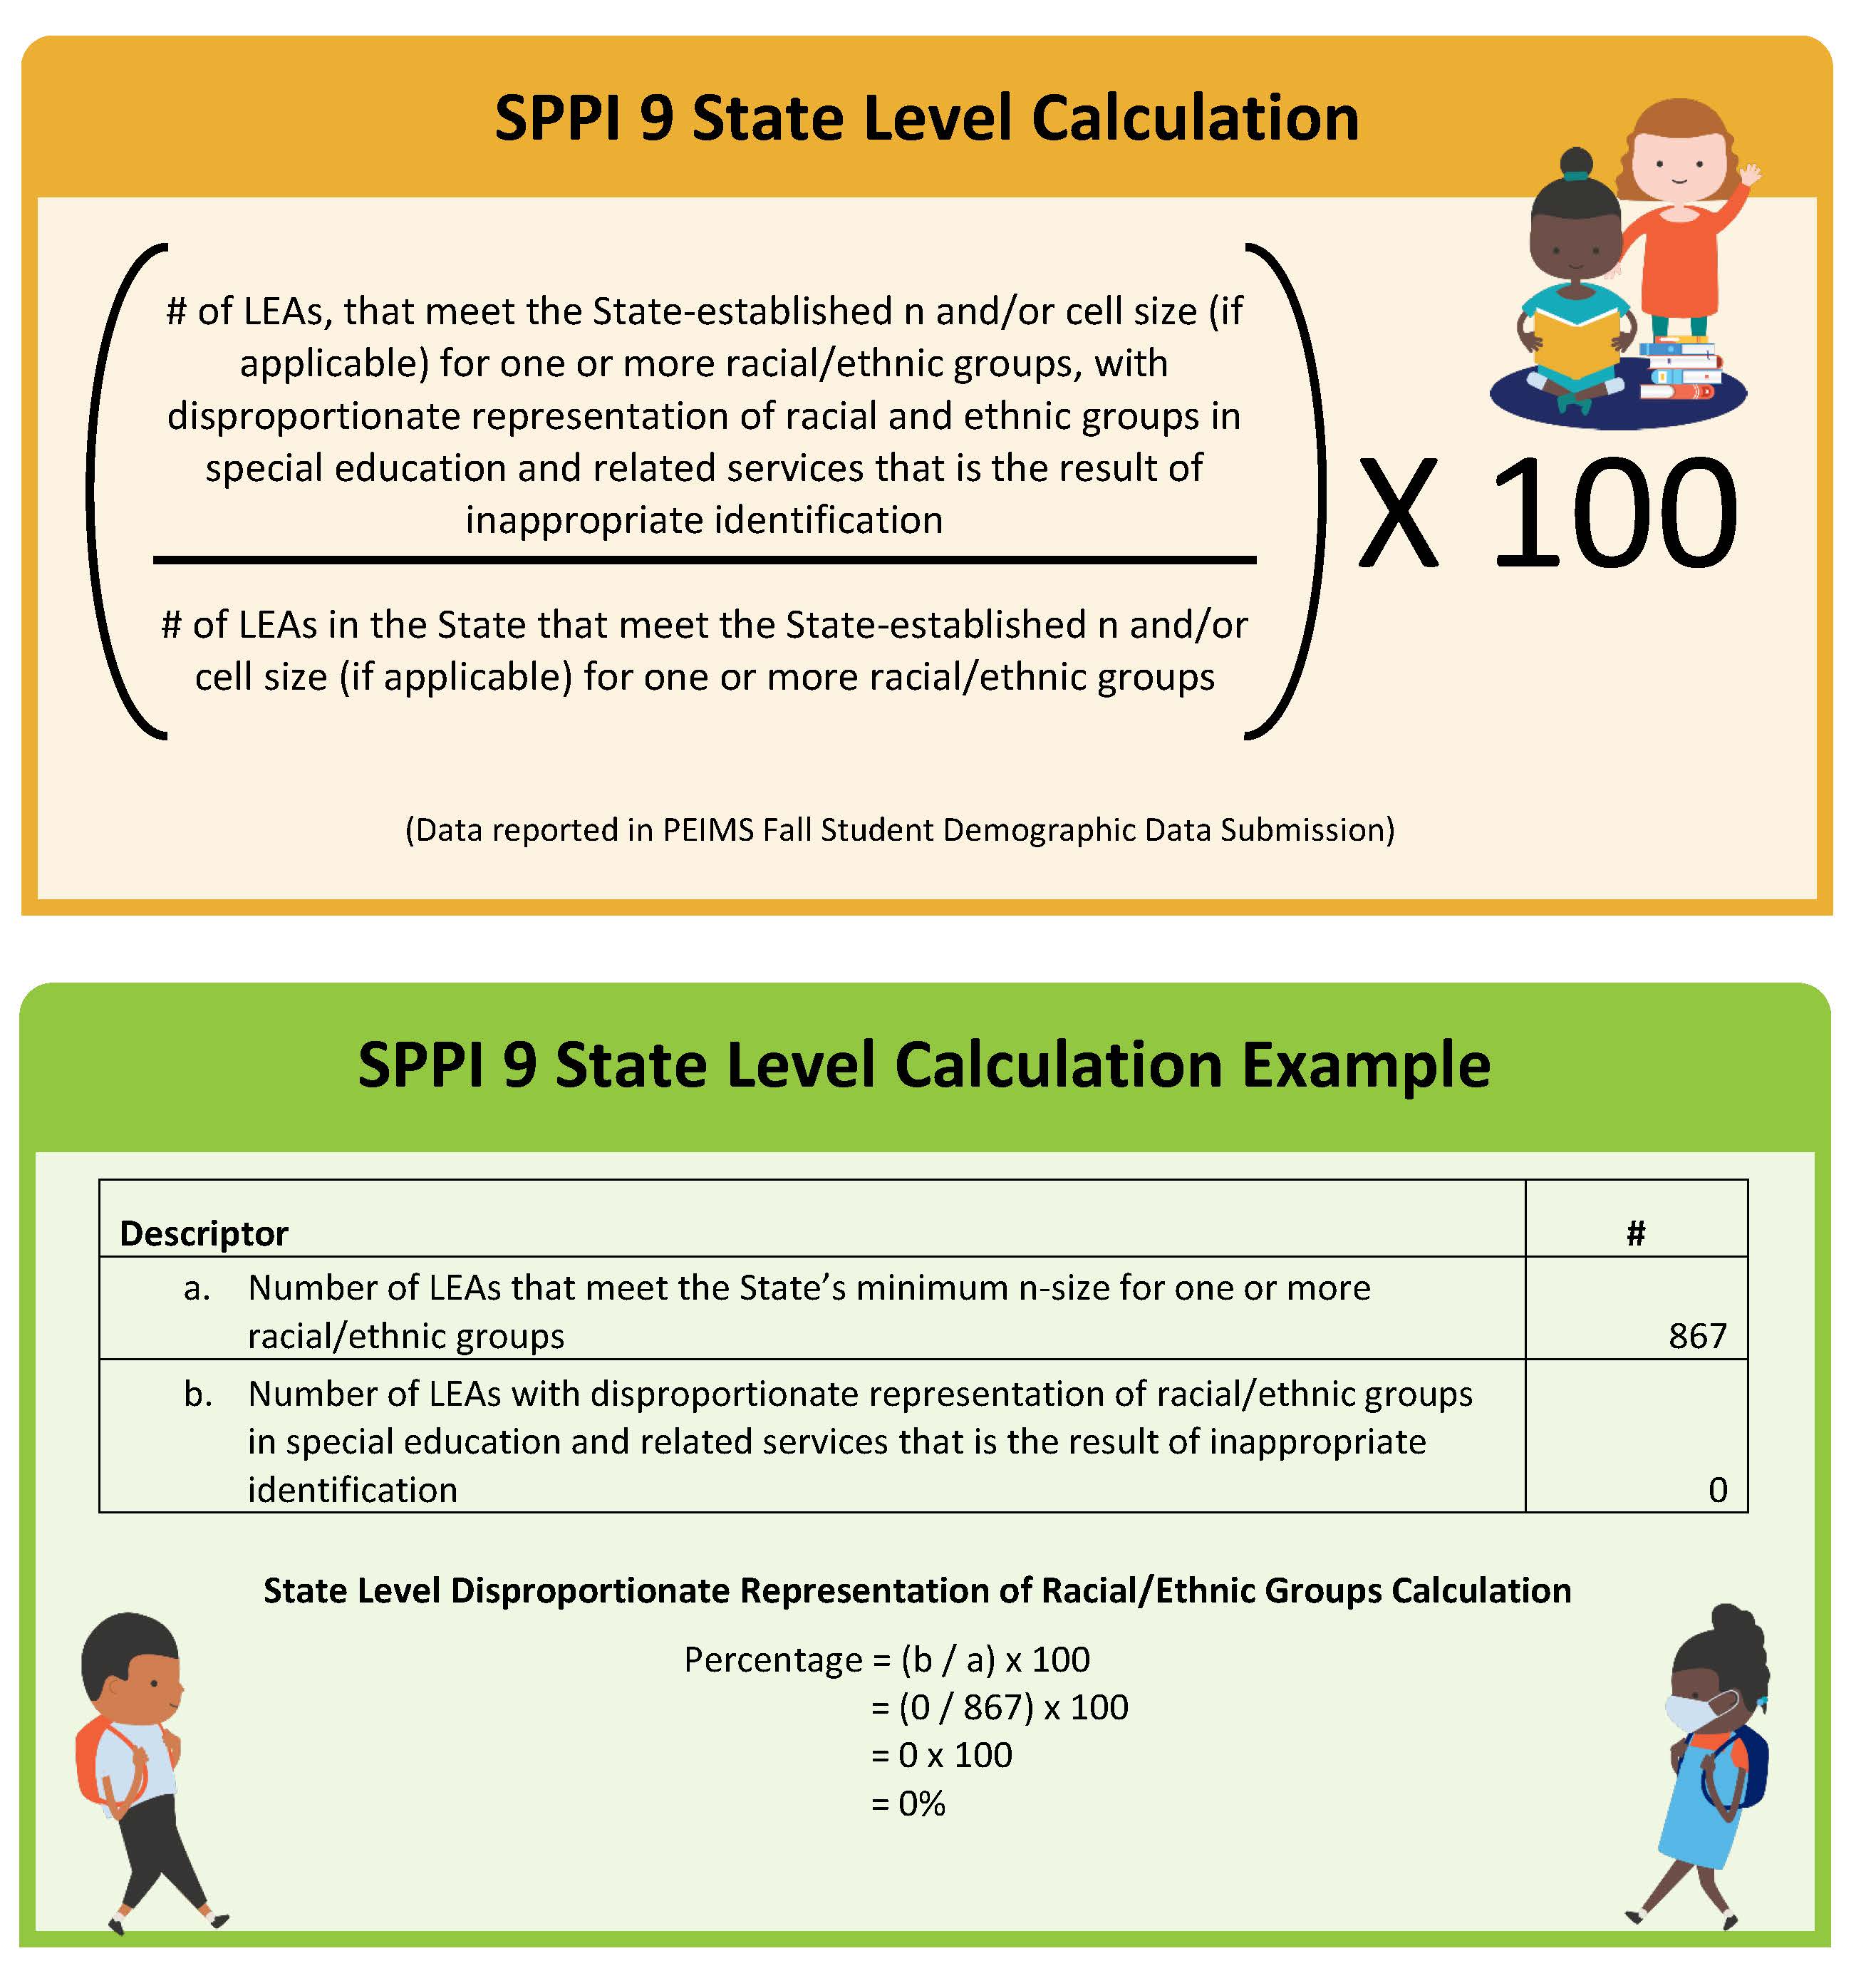 SPPI 9 Calculation and Example